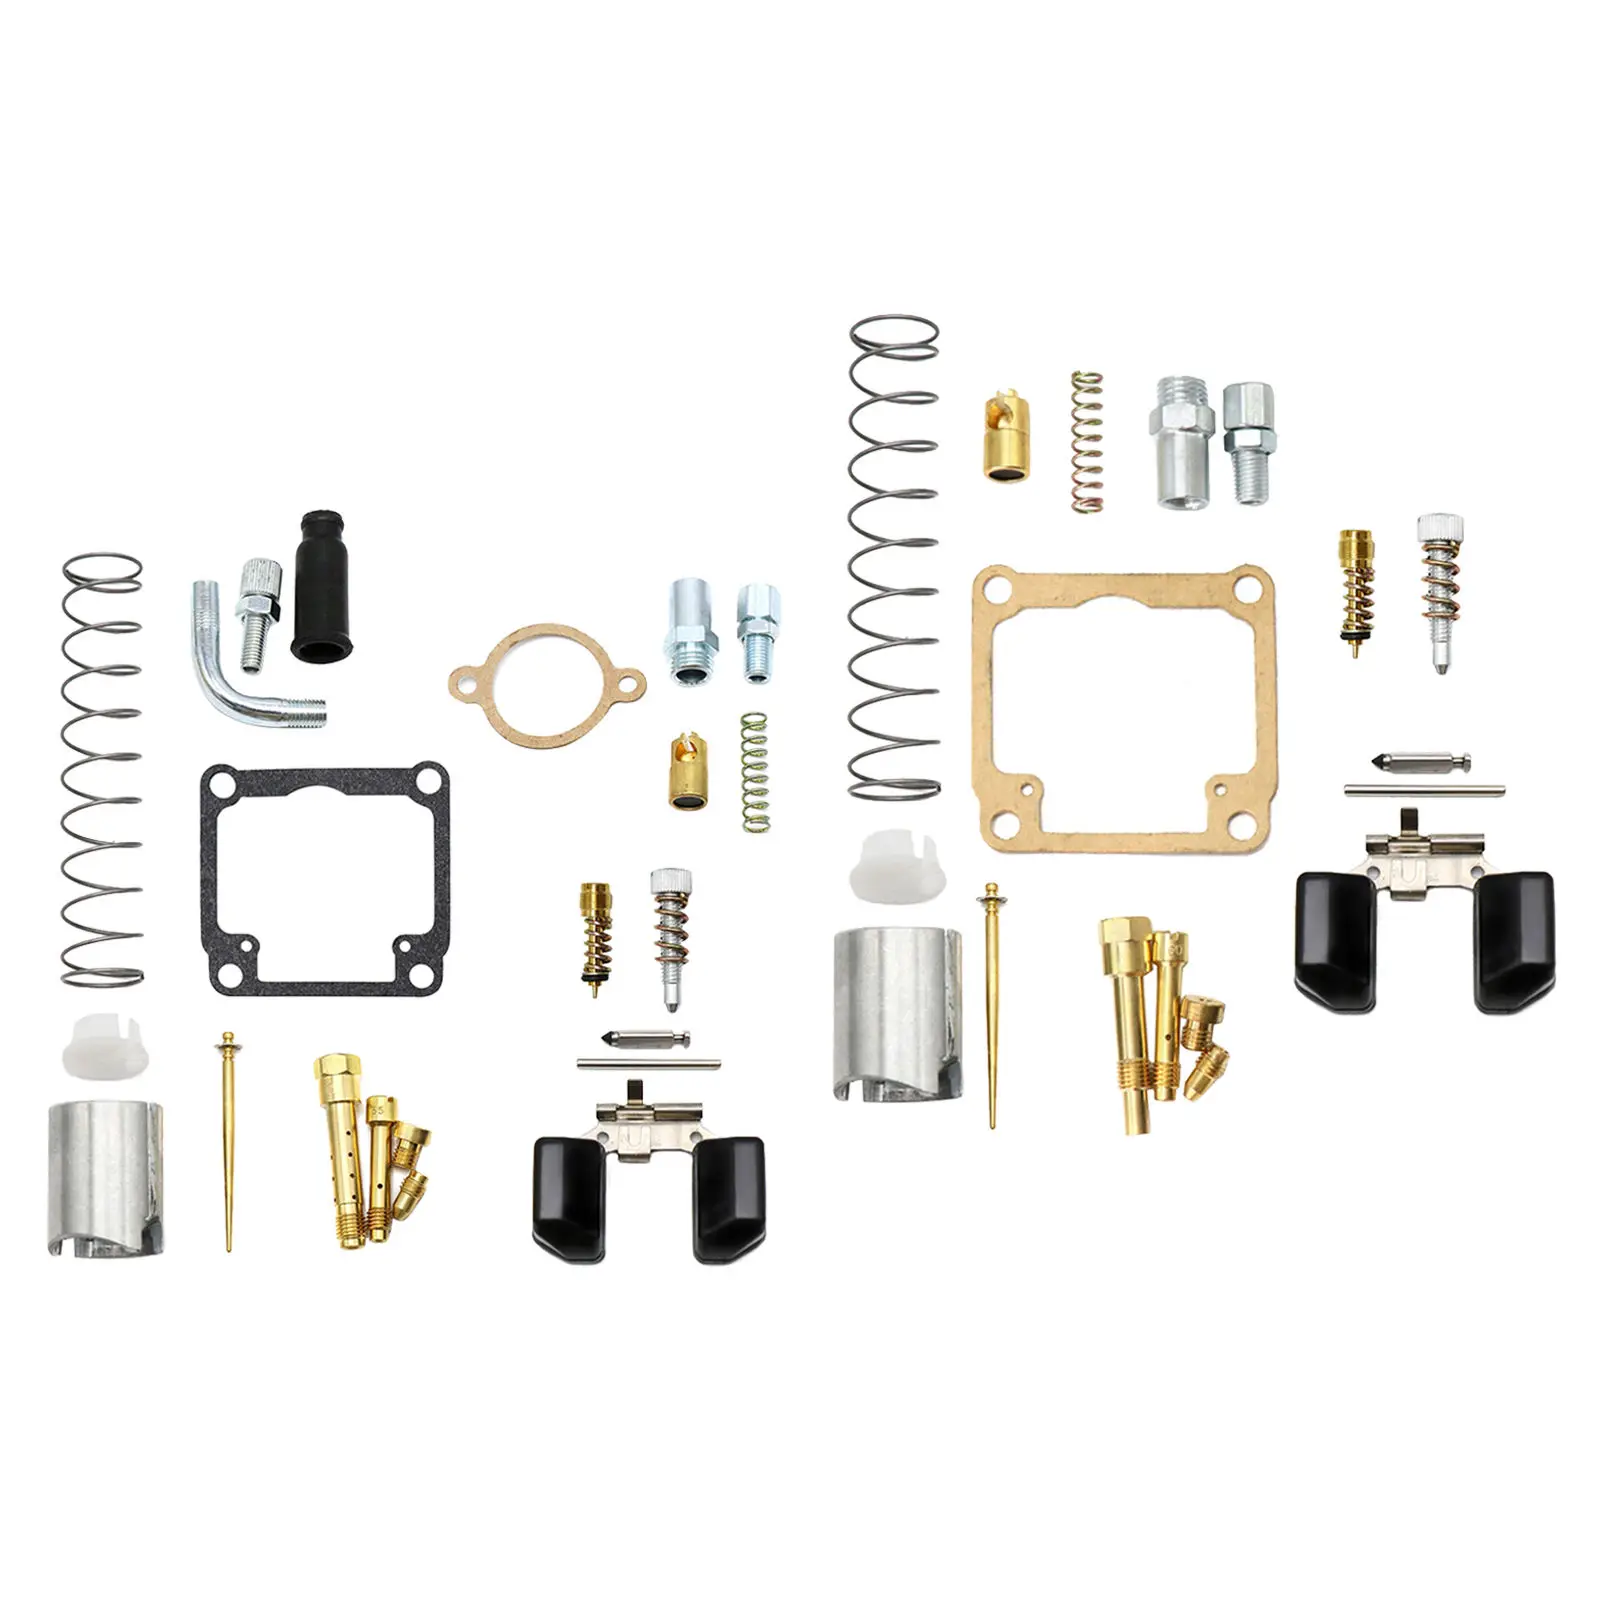 Motorcycle Carburetor Repair Kit Set for  PHBG AD 17mm 17.5mm 19mm Motorcycle Parts Jets, Light Weight and Easy to Carry